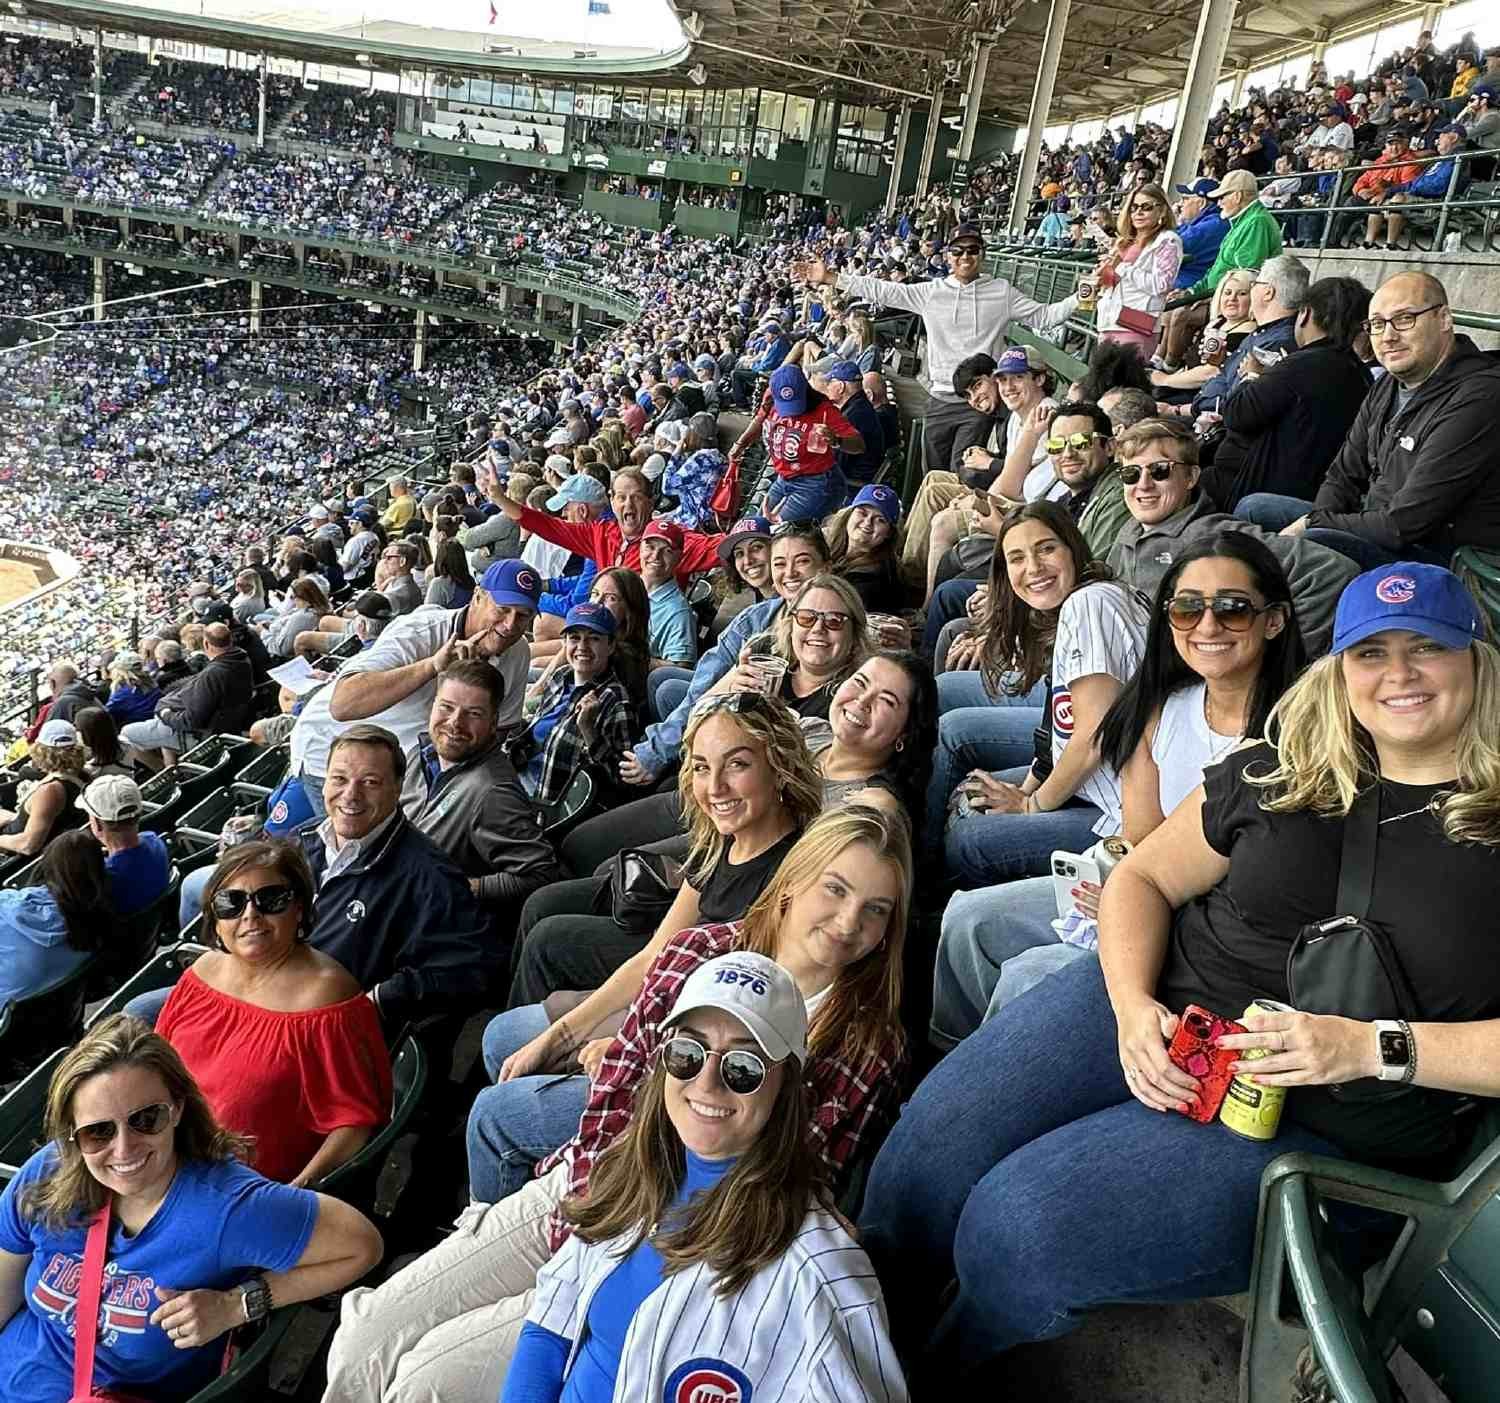 Cubs Game Group Outing in Chicago